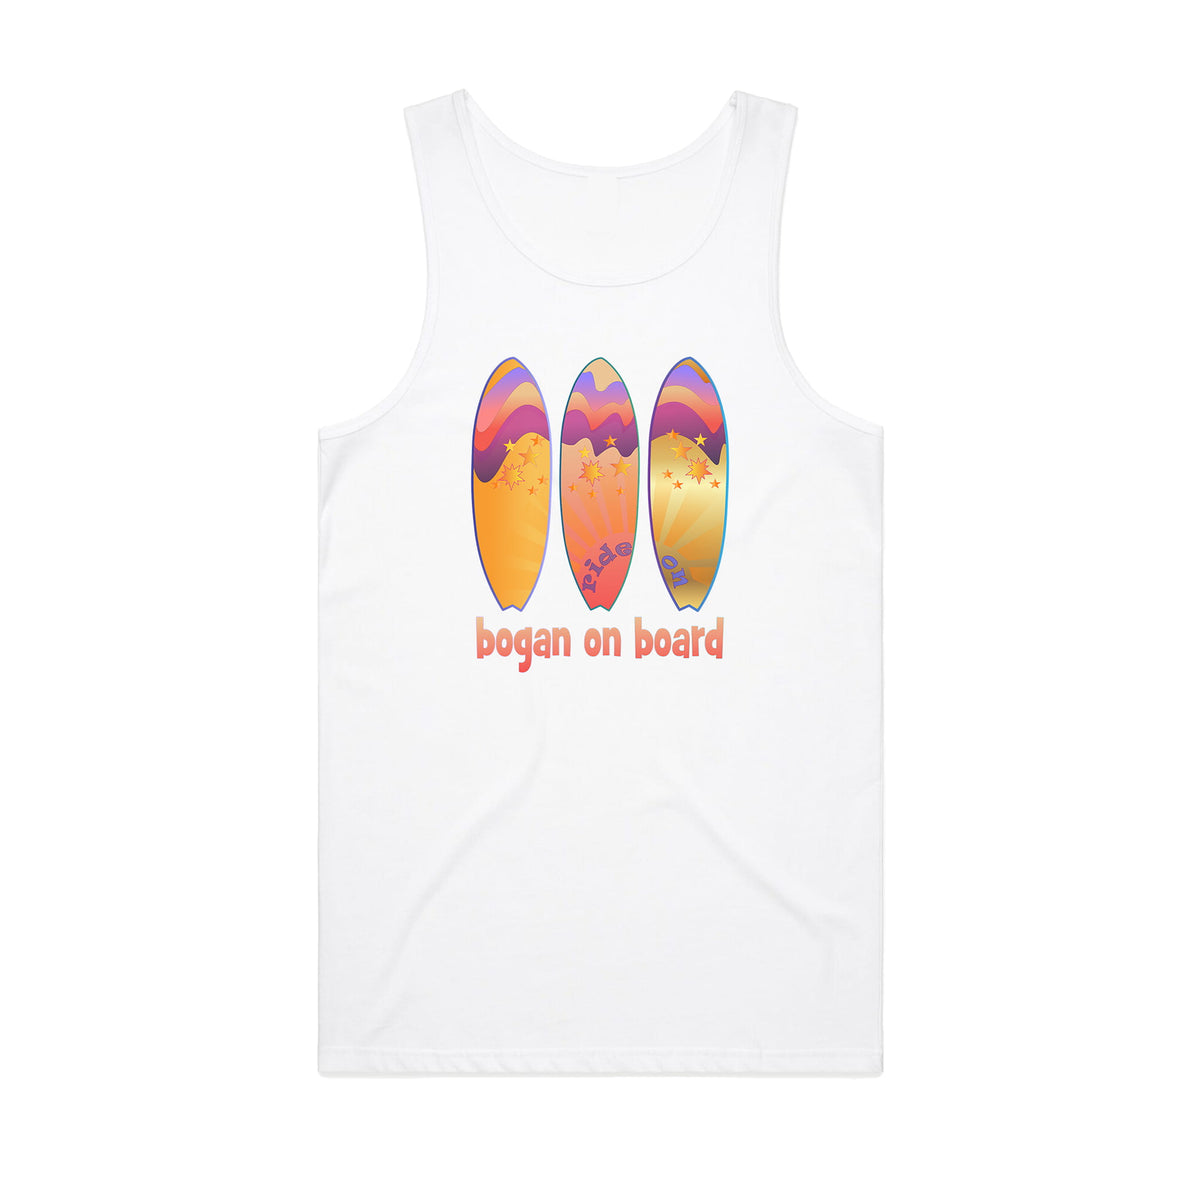 White tank top with bright surfboard design